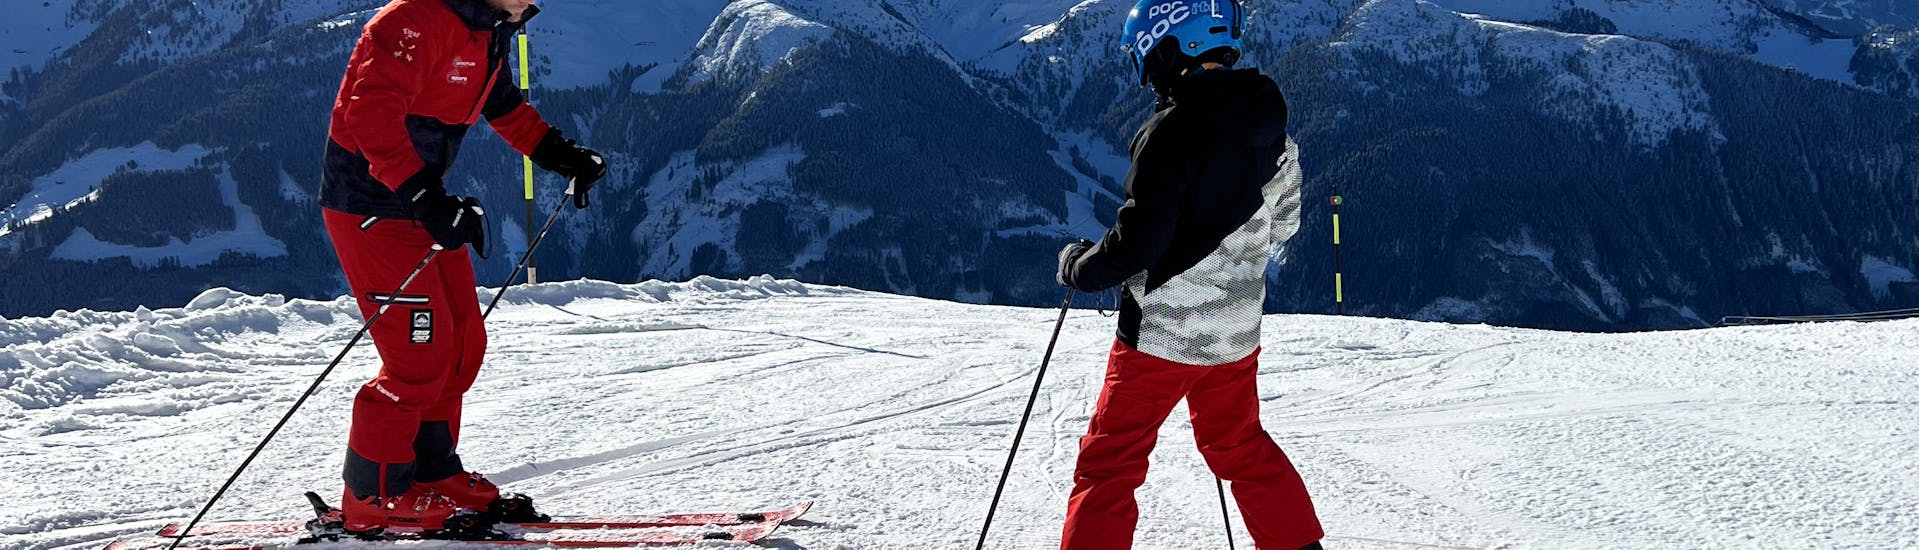 During the private ski lessons for kids and teens of all levels, a ski instructor from Skischule Arena Zell am Ziller and his student are doing a fist bump on the slopes.